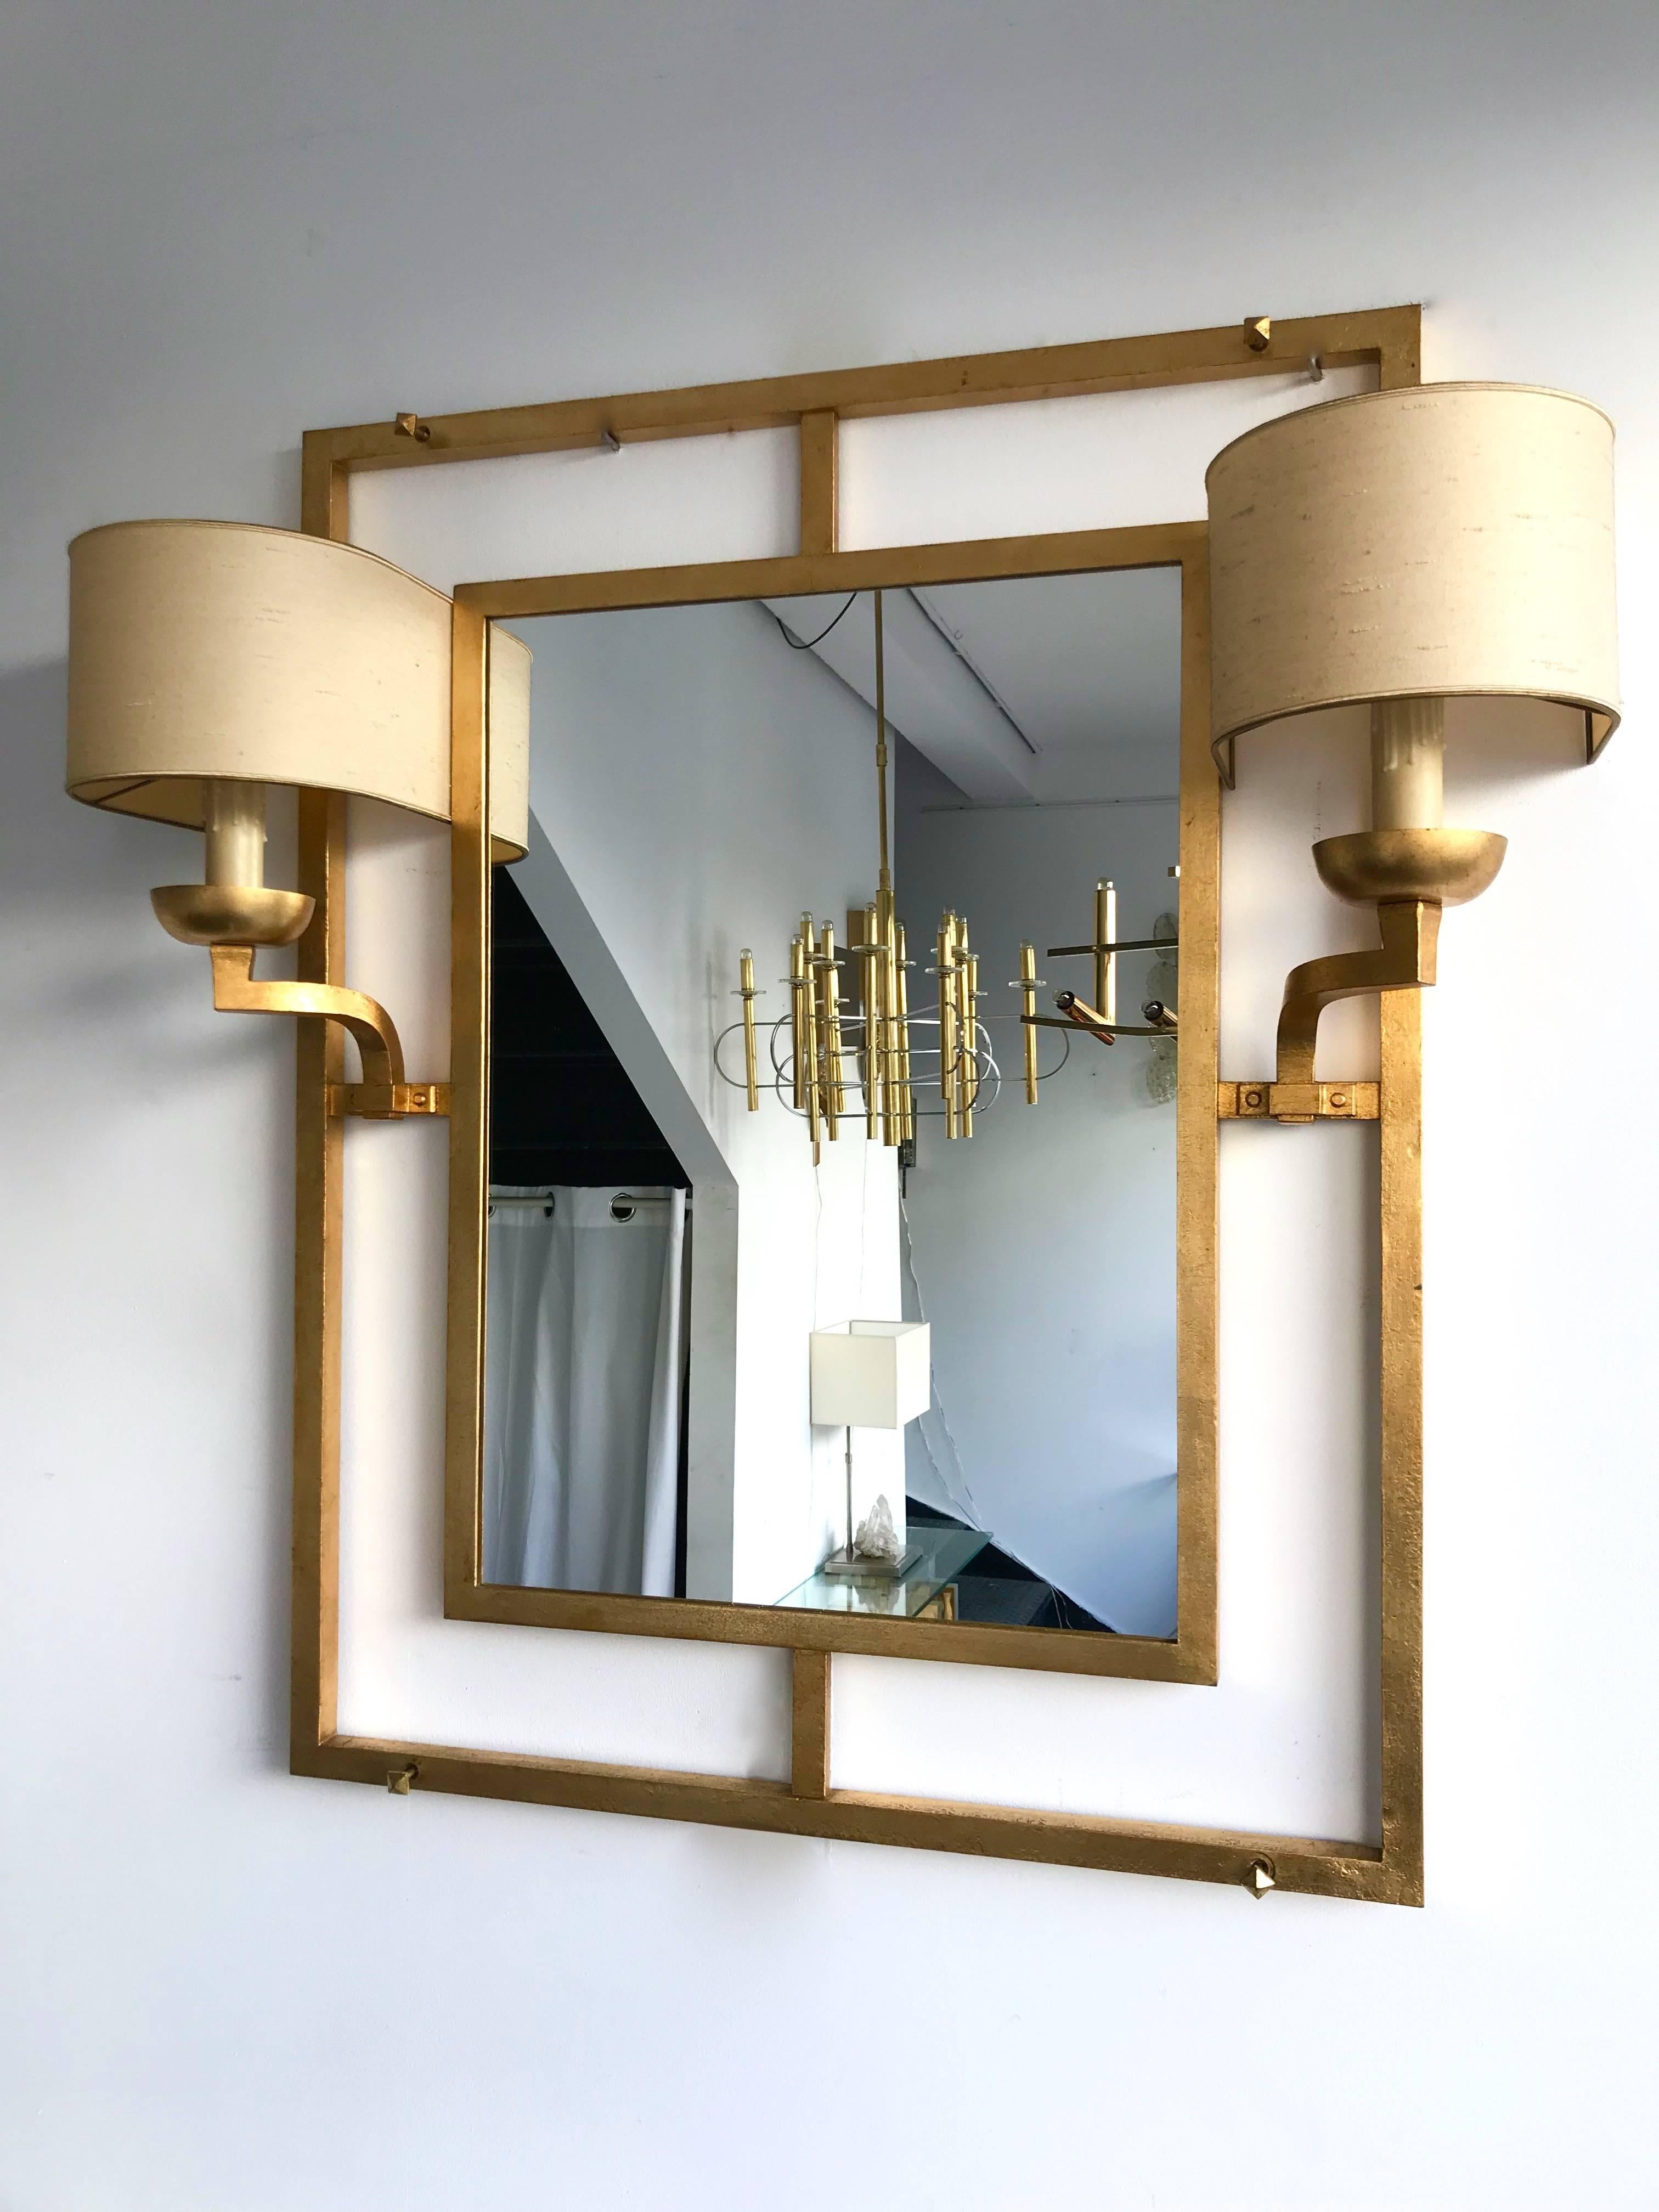 Very rare set console and unique piece lightning mirror with sconces wall lights by the French artist designer Robert and Roger Thibier, a special order from the 1960. Neoclassical style, Art Deco inspiration. Wrought iron and gold leaf. Very